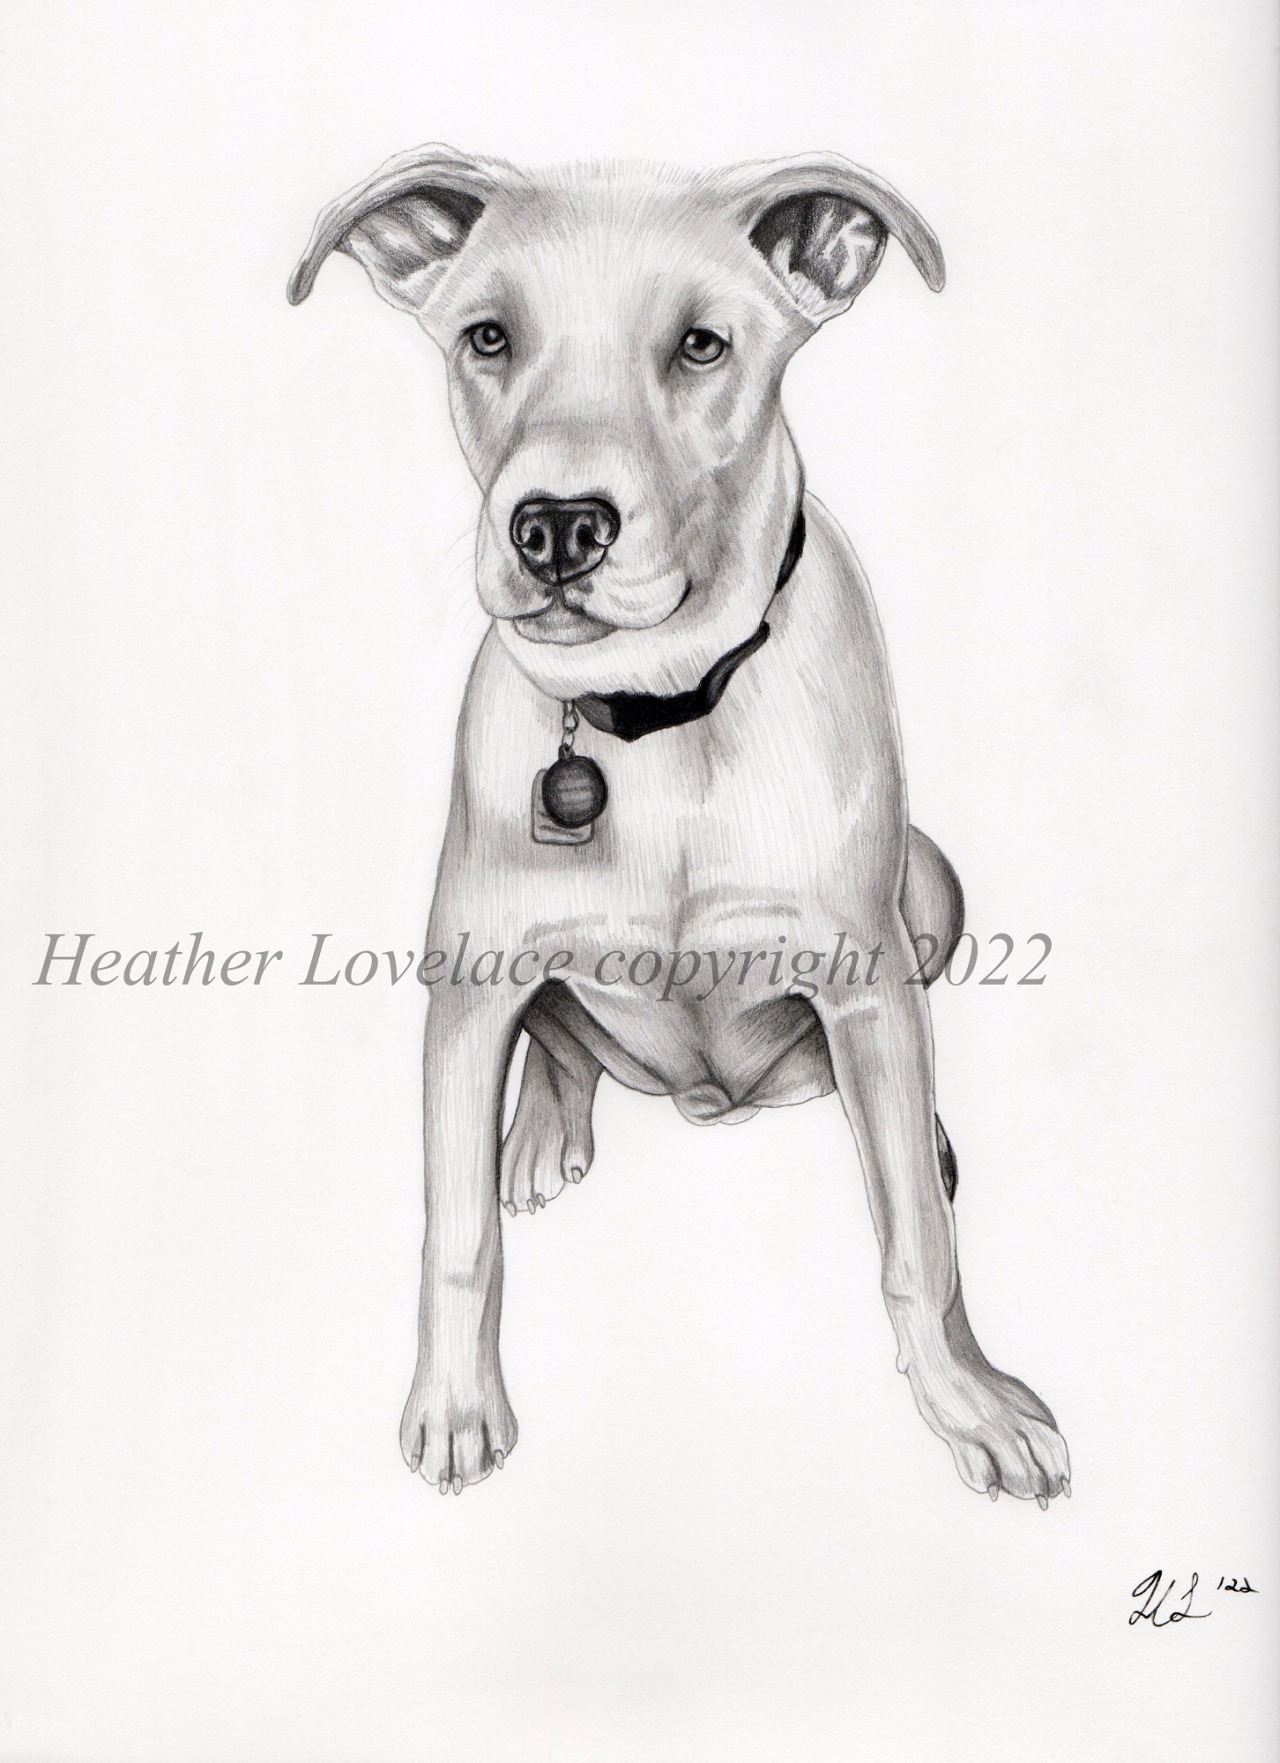 A commissioned memorial portrait of a Hangin Tree Cow Dog named Wally who sadly passed away to cancer at only 7 months old last year. Staedtler Mars Lumograph pencils used on 9″X12″ Strathmore paper. #hangin tree cow dog #herding dog#herding breed#dog#canine#pets#animal#pet portrait#commission#Dog Art#dog drawing#Dog portrait#Pet Memorial